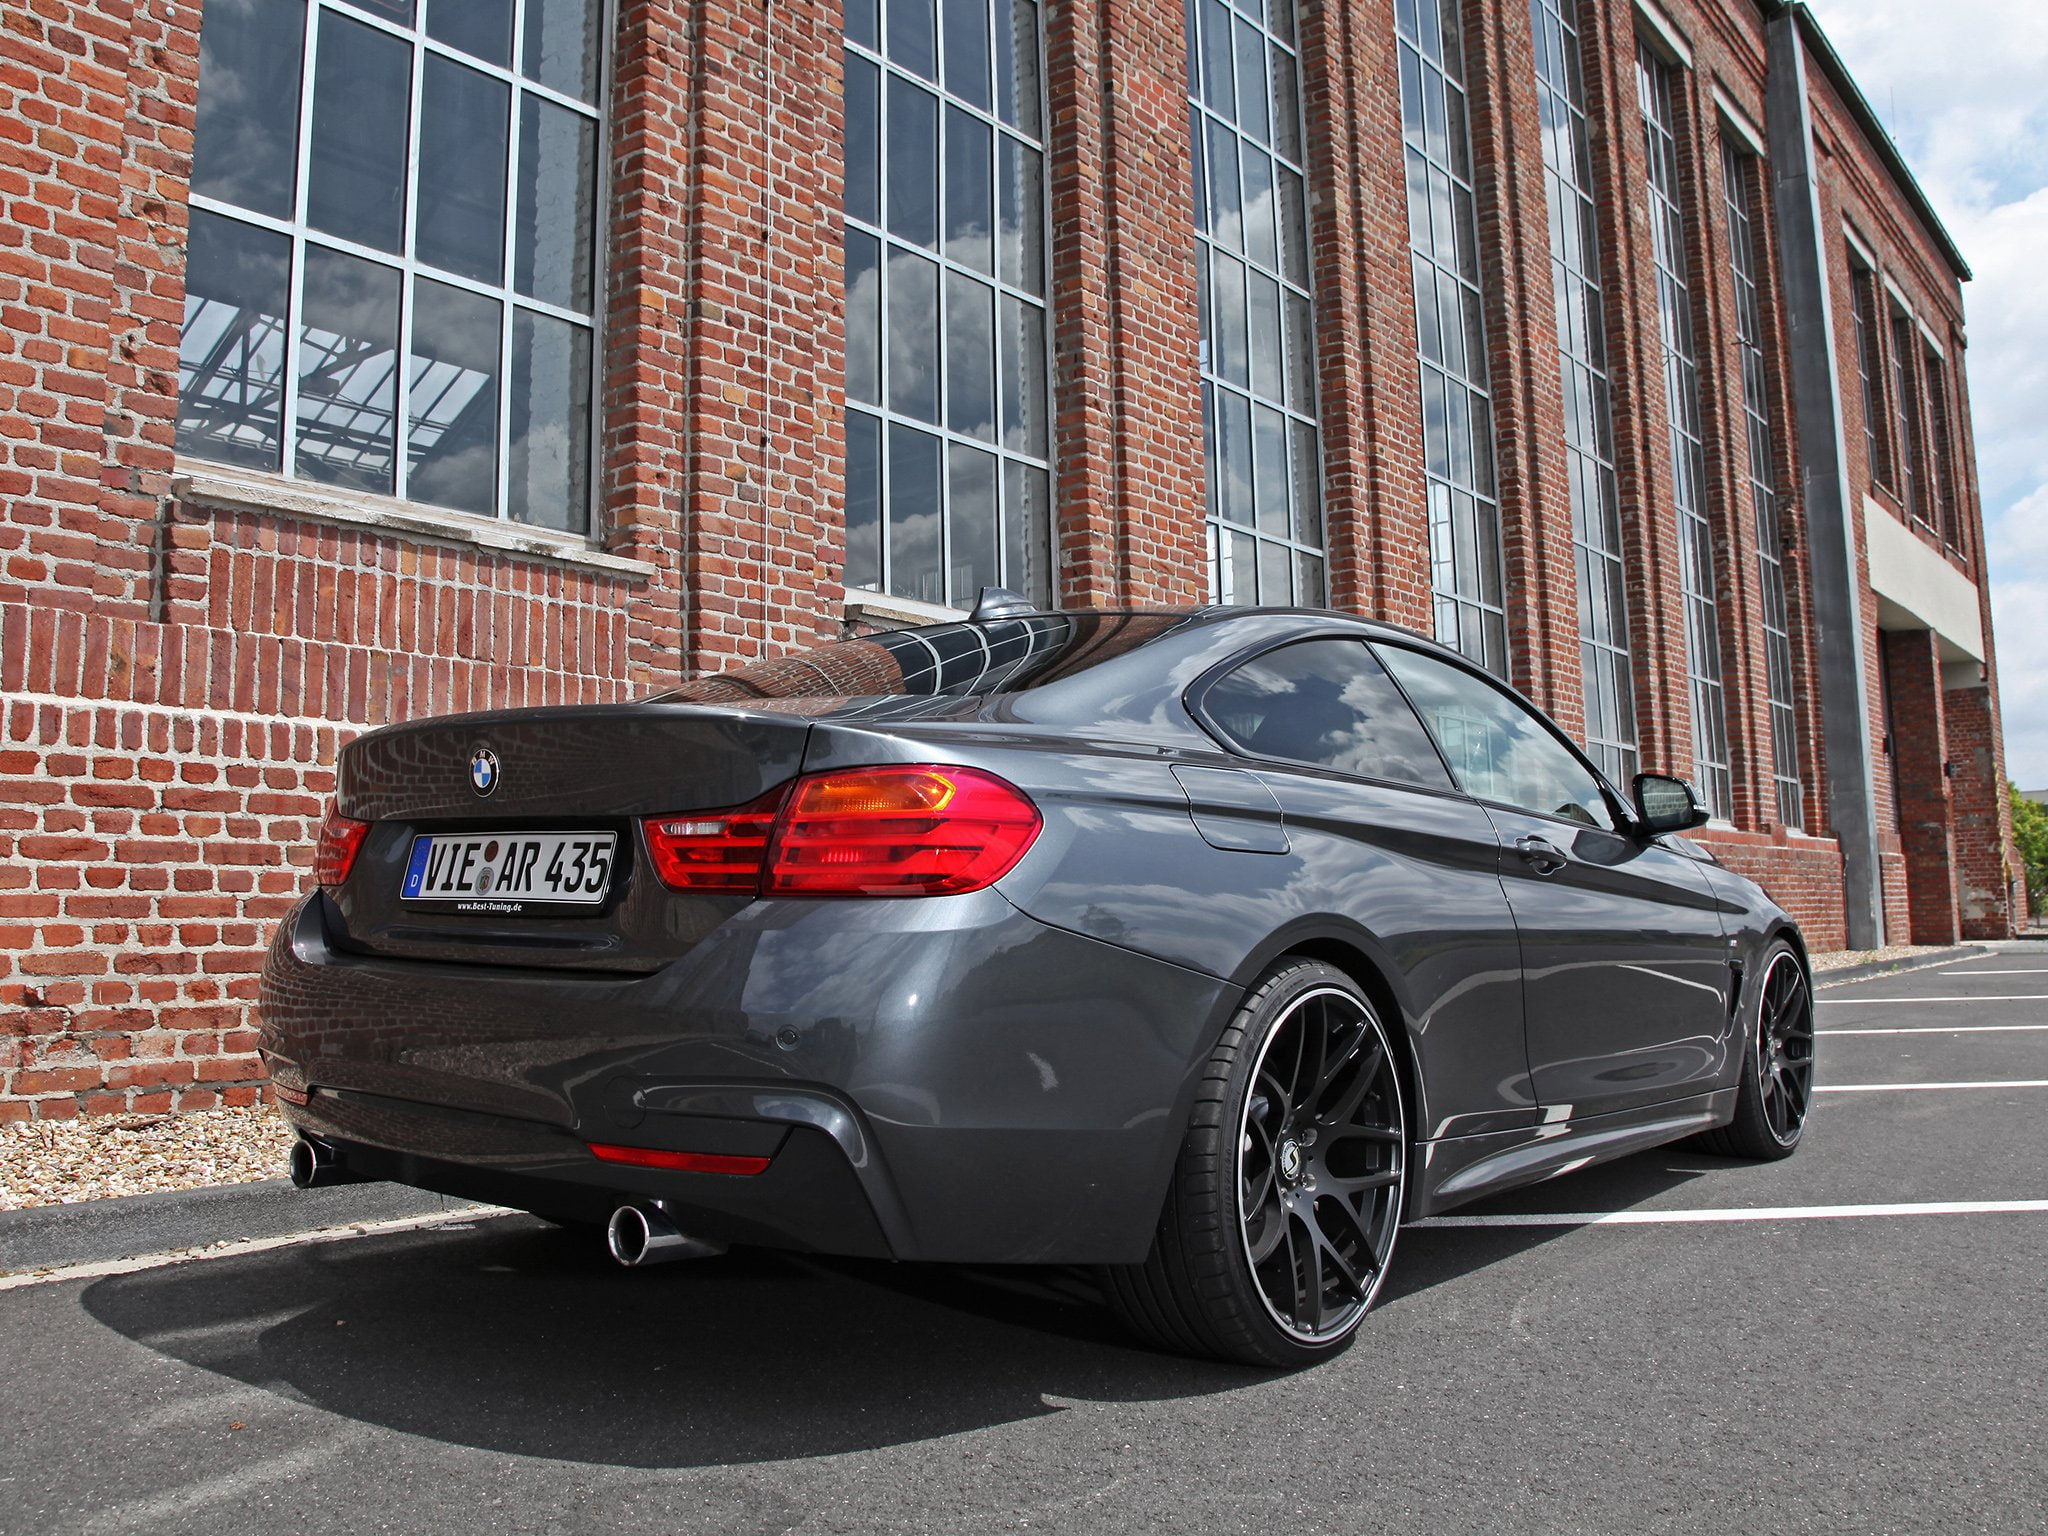 2014, 435i, best tuning, bmw, coupe, f32, m sport package, xdrive